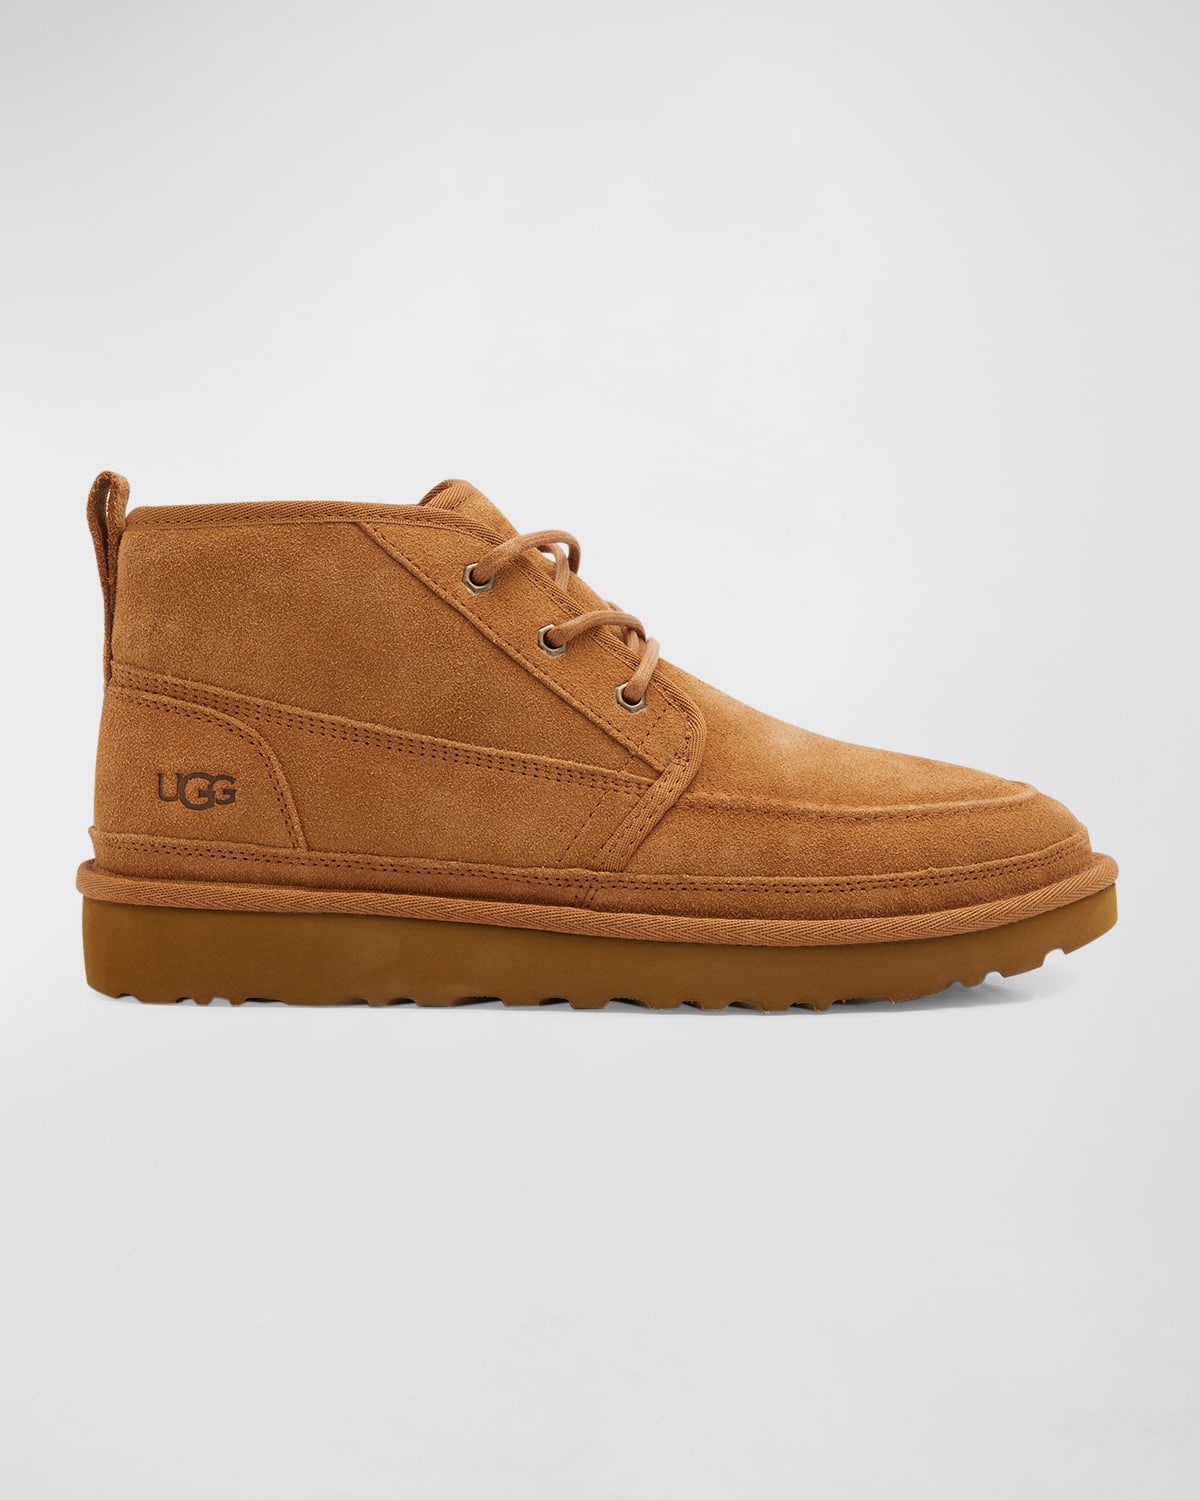 UGG MEN'S NEUMEL MOC SHEARLING-LINED SUEDE CHUKKA BOOTS